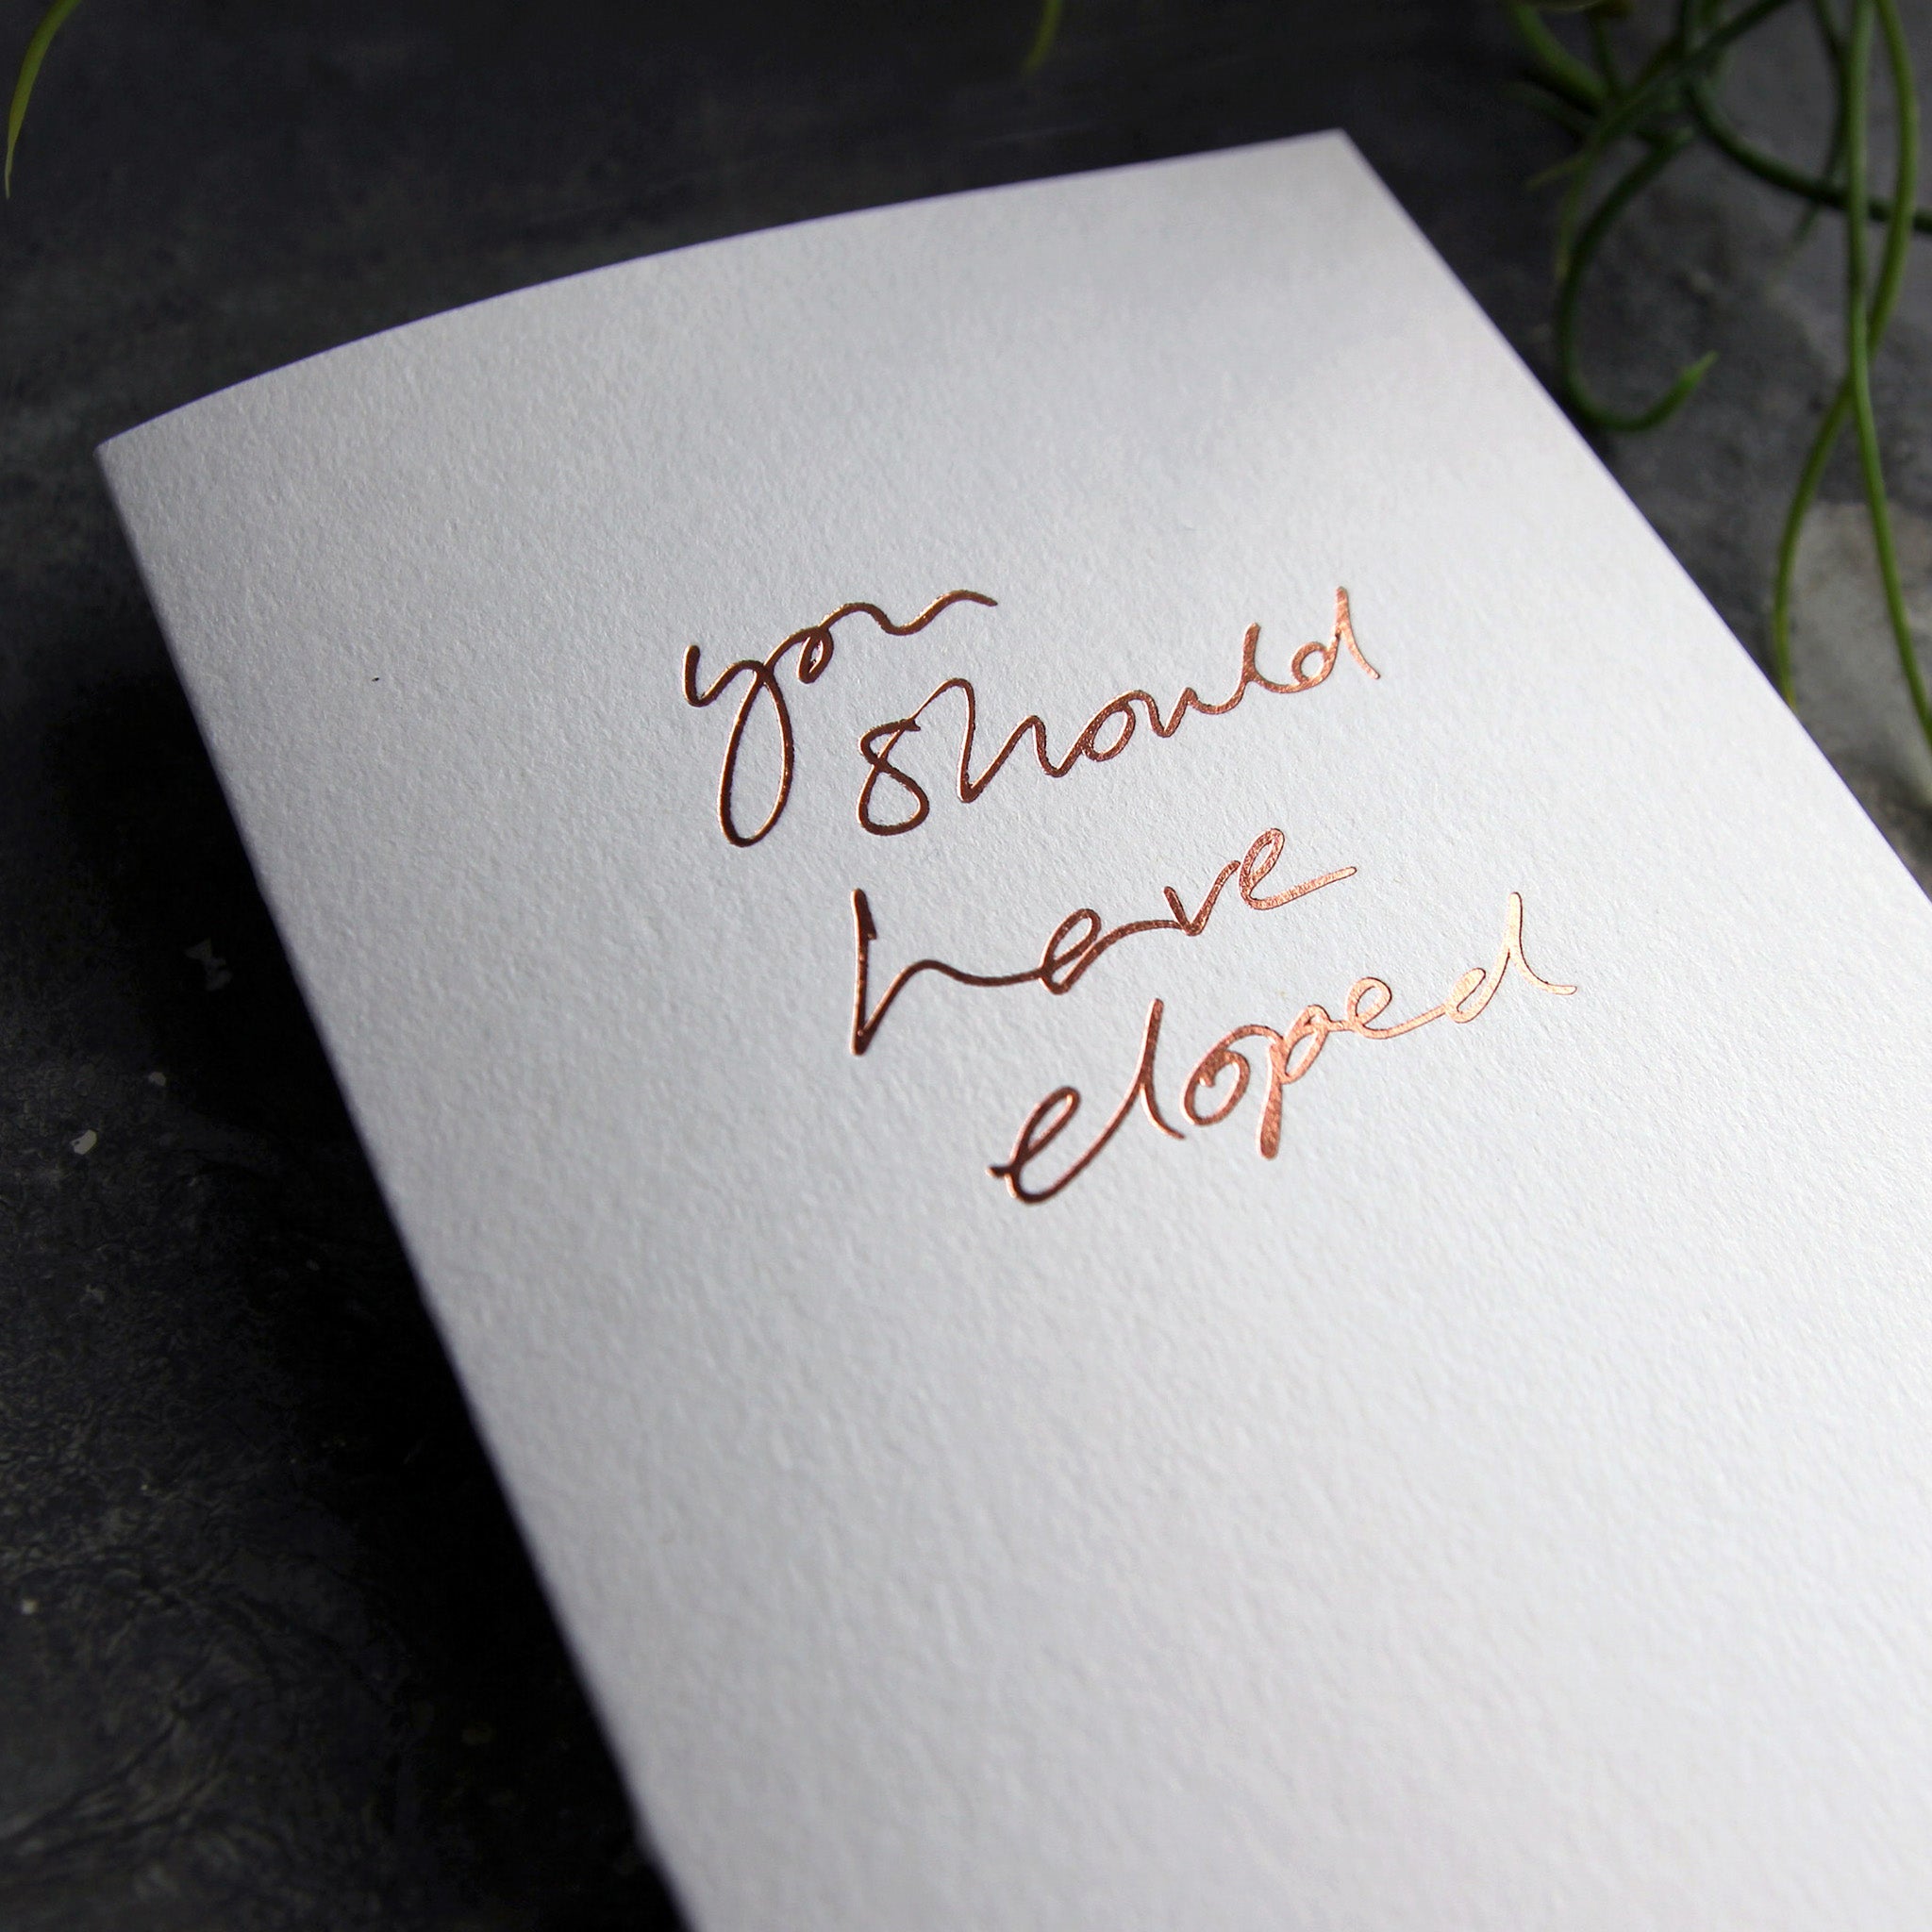 Close up of luxury white greetings card with "You Should Have Eloped' handwritten in the front and hand printed in rose gold foil on a grey background with some green plant leaves at the side.